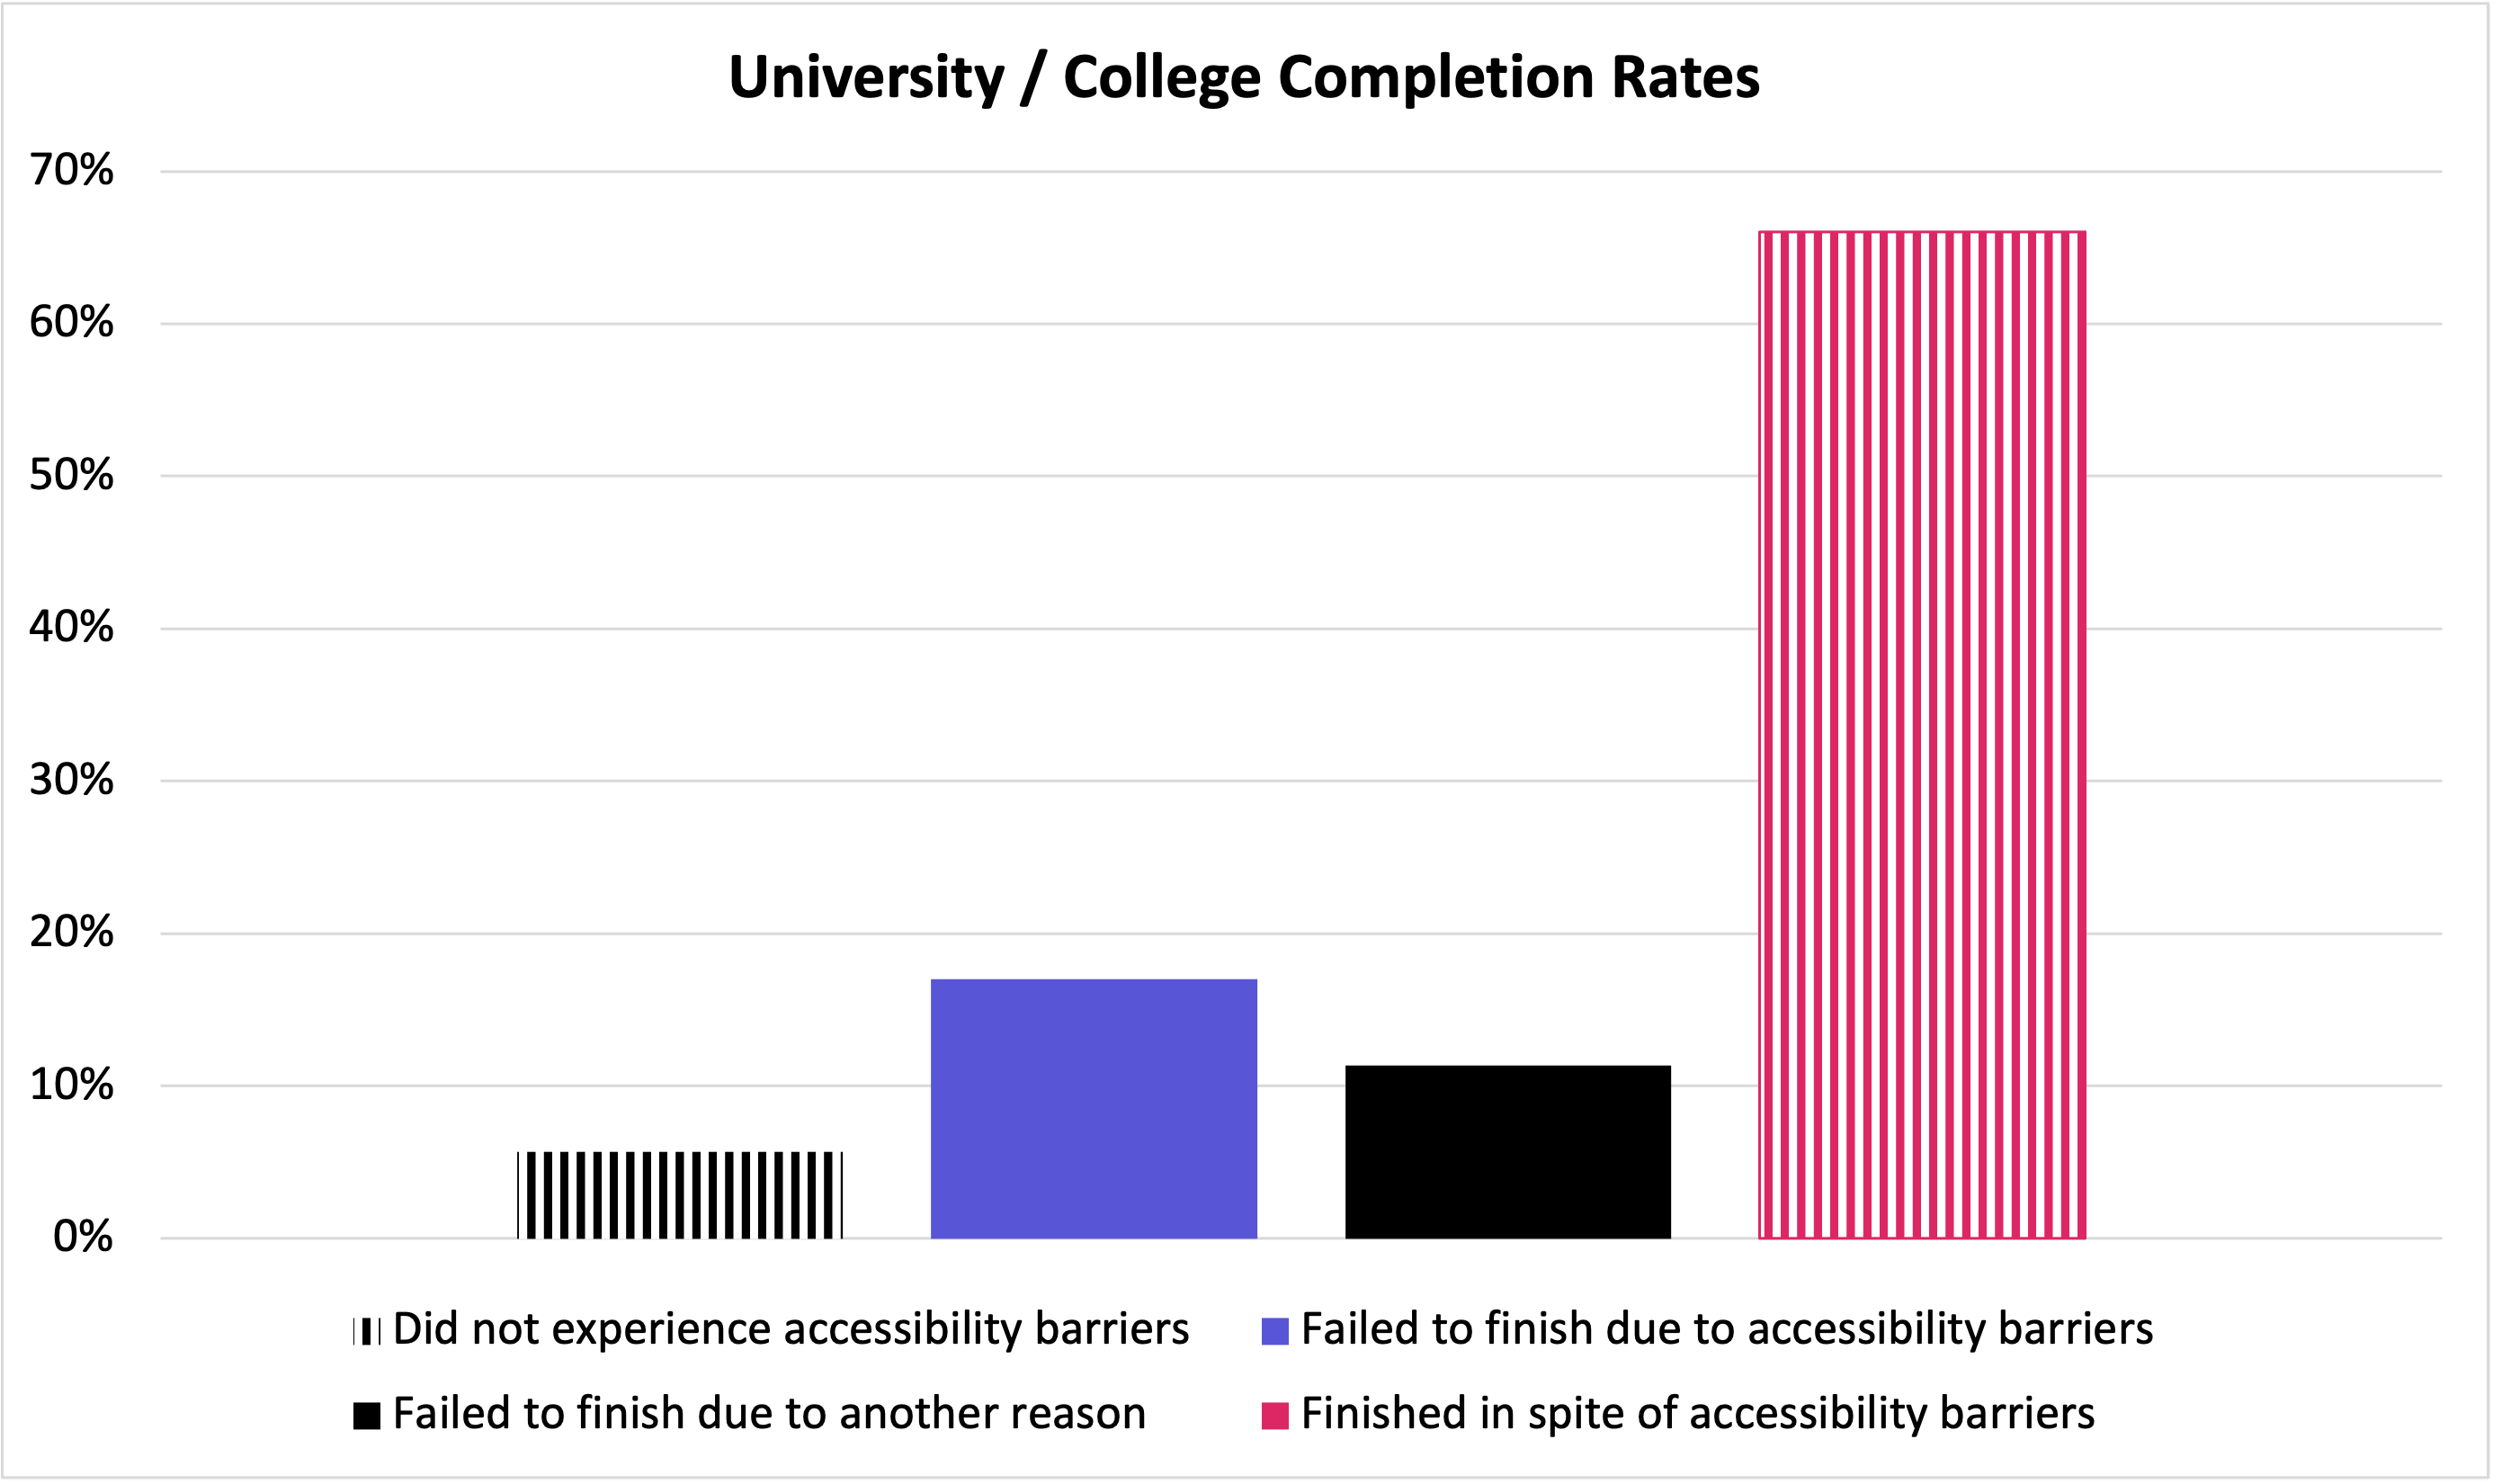 Chart: University and College Completion Rates from Fable Community survey respondents. 65% of responses were "Finished in spite of accessibility barriers", followed by nearly 20% responding "Failed to finish due to accessibility barriers", just over 10% responding "Failed to finish due to another reason", and the smallest percentage, approximately 5%, responded "Did not experience accessibility barriers."